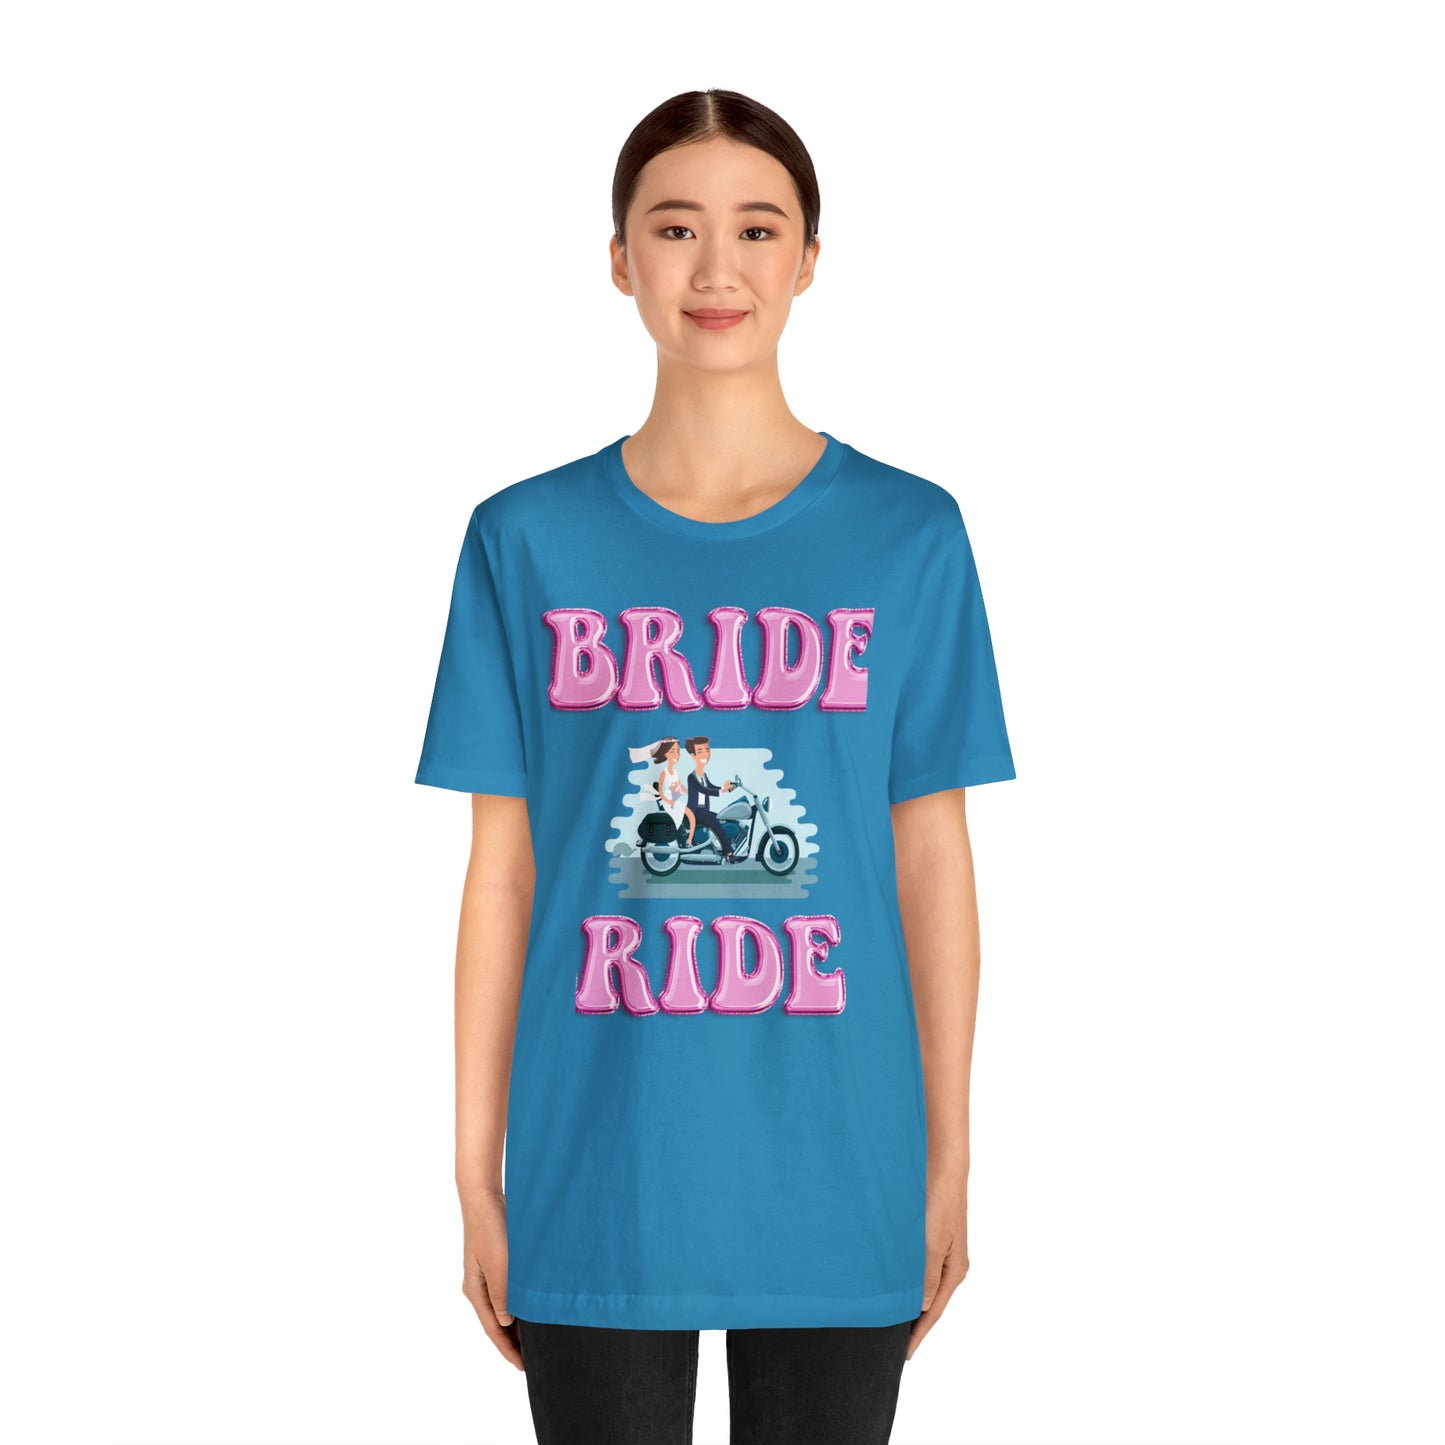 Bride Ride, Motorcycle lover, Biker or Head for the border Unisex Jersey Short Sleeve Tee